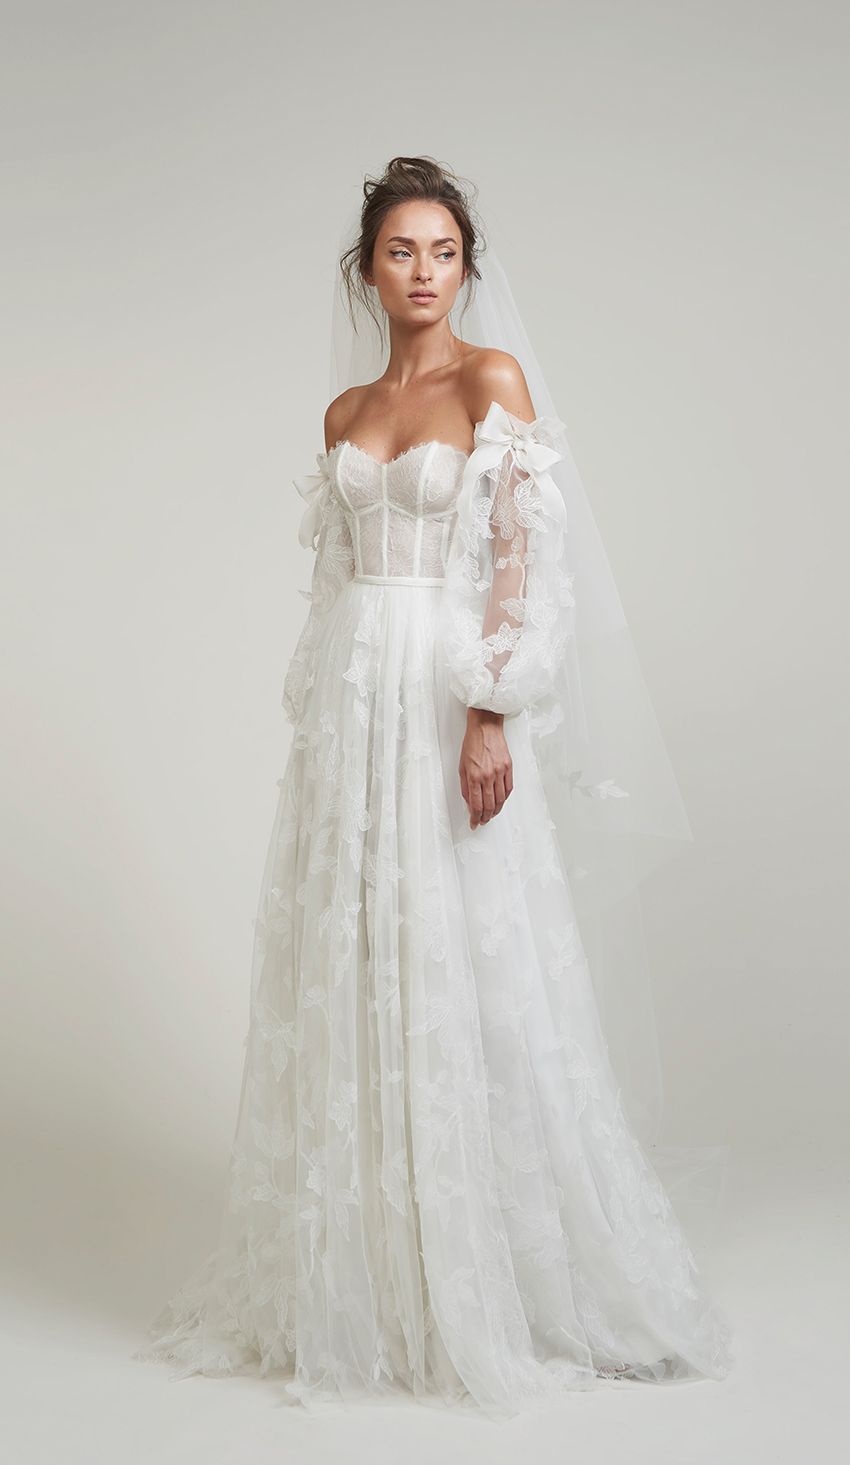 These Will Be the 5 Biggest Bridal Trends of 2020, Period | Who What Wear